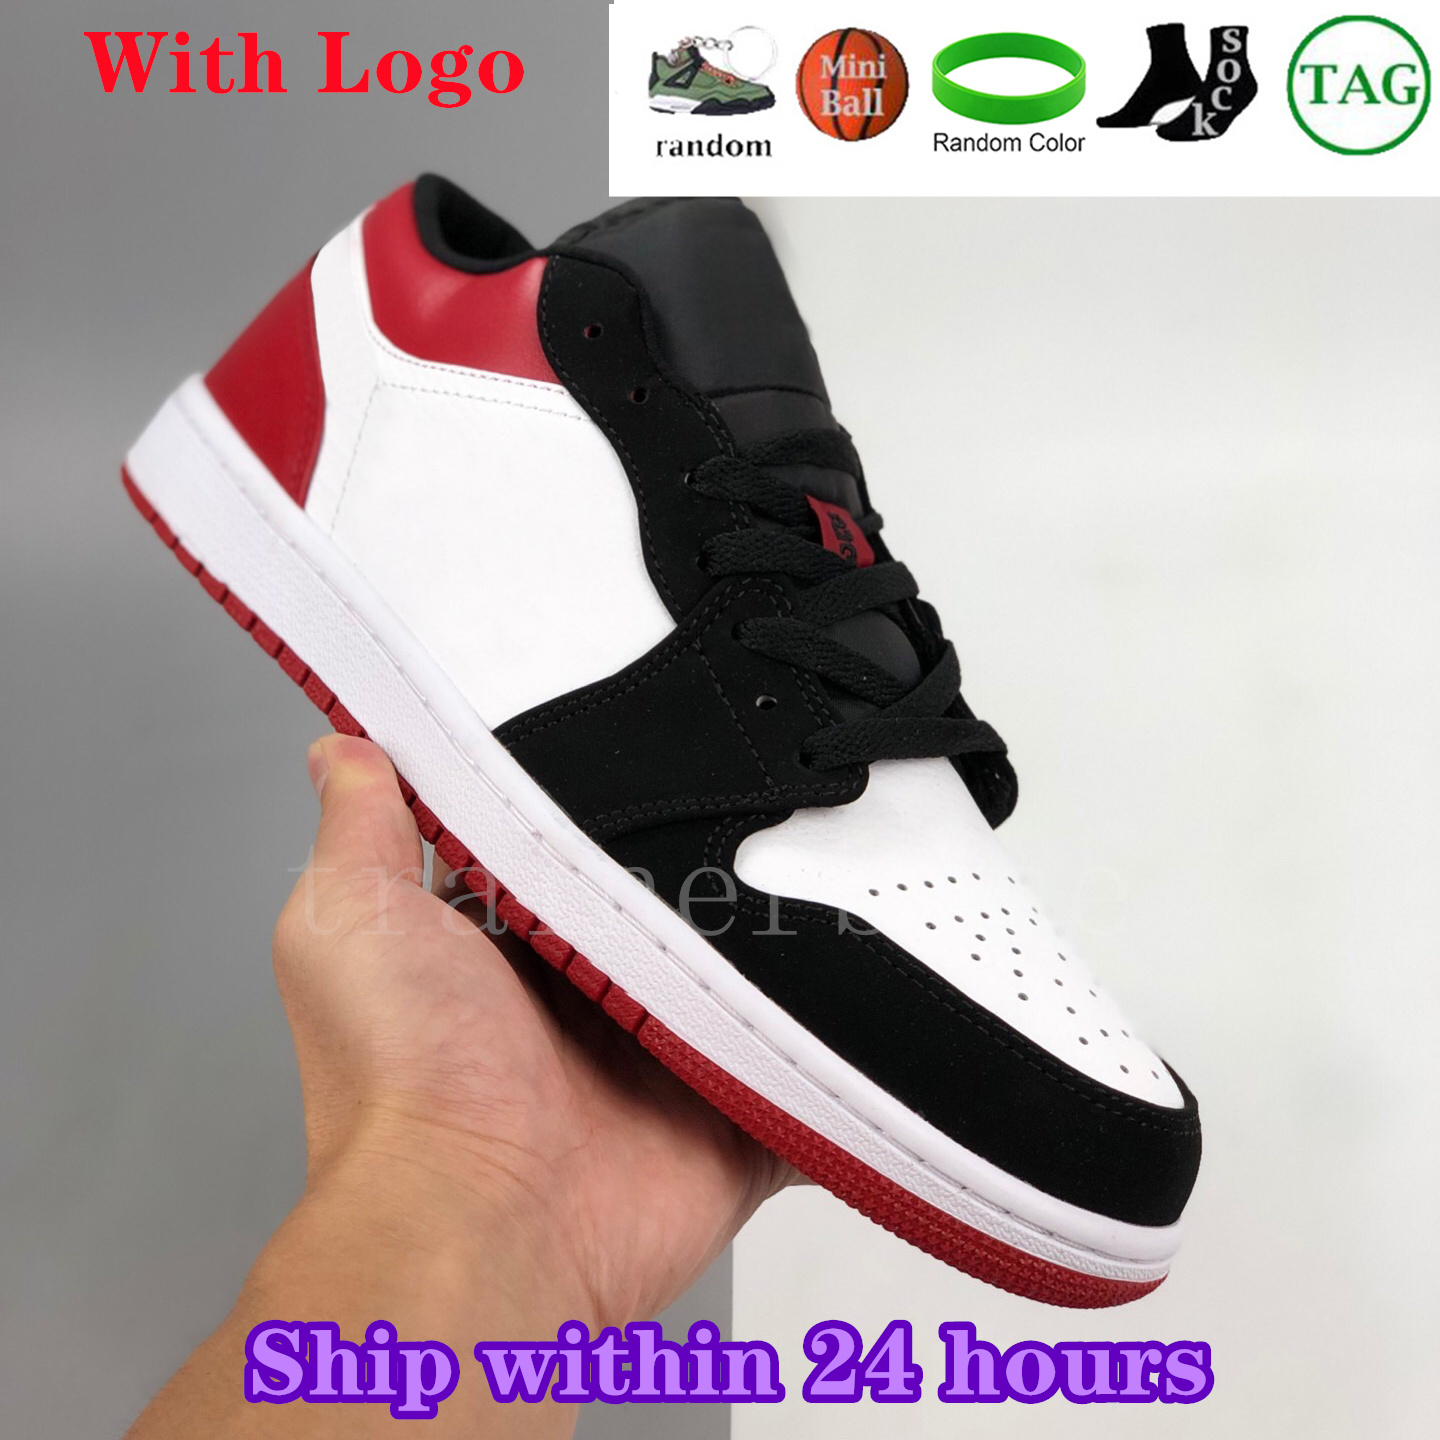 Jumpman Low 1 Basketball Shoes for men women White Black Red OG UNC Mystic Navy To My First Coach mens womens Low 1s Sneakers Game Royal Banned Crimson Tint trainers